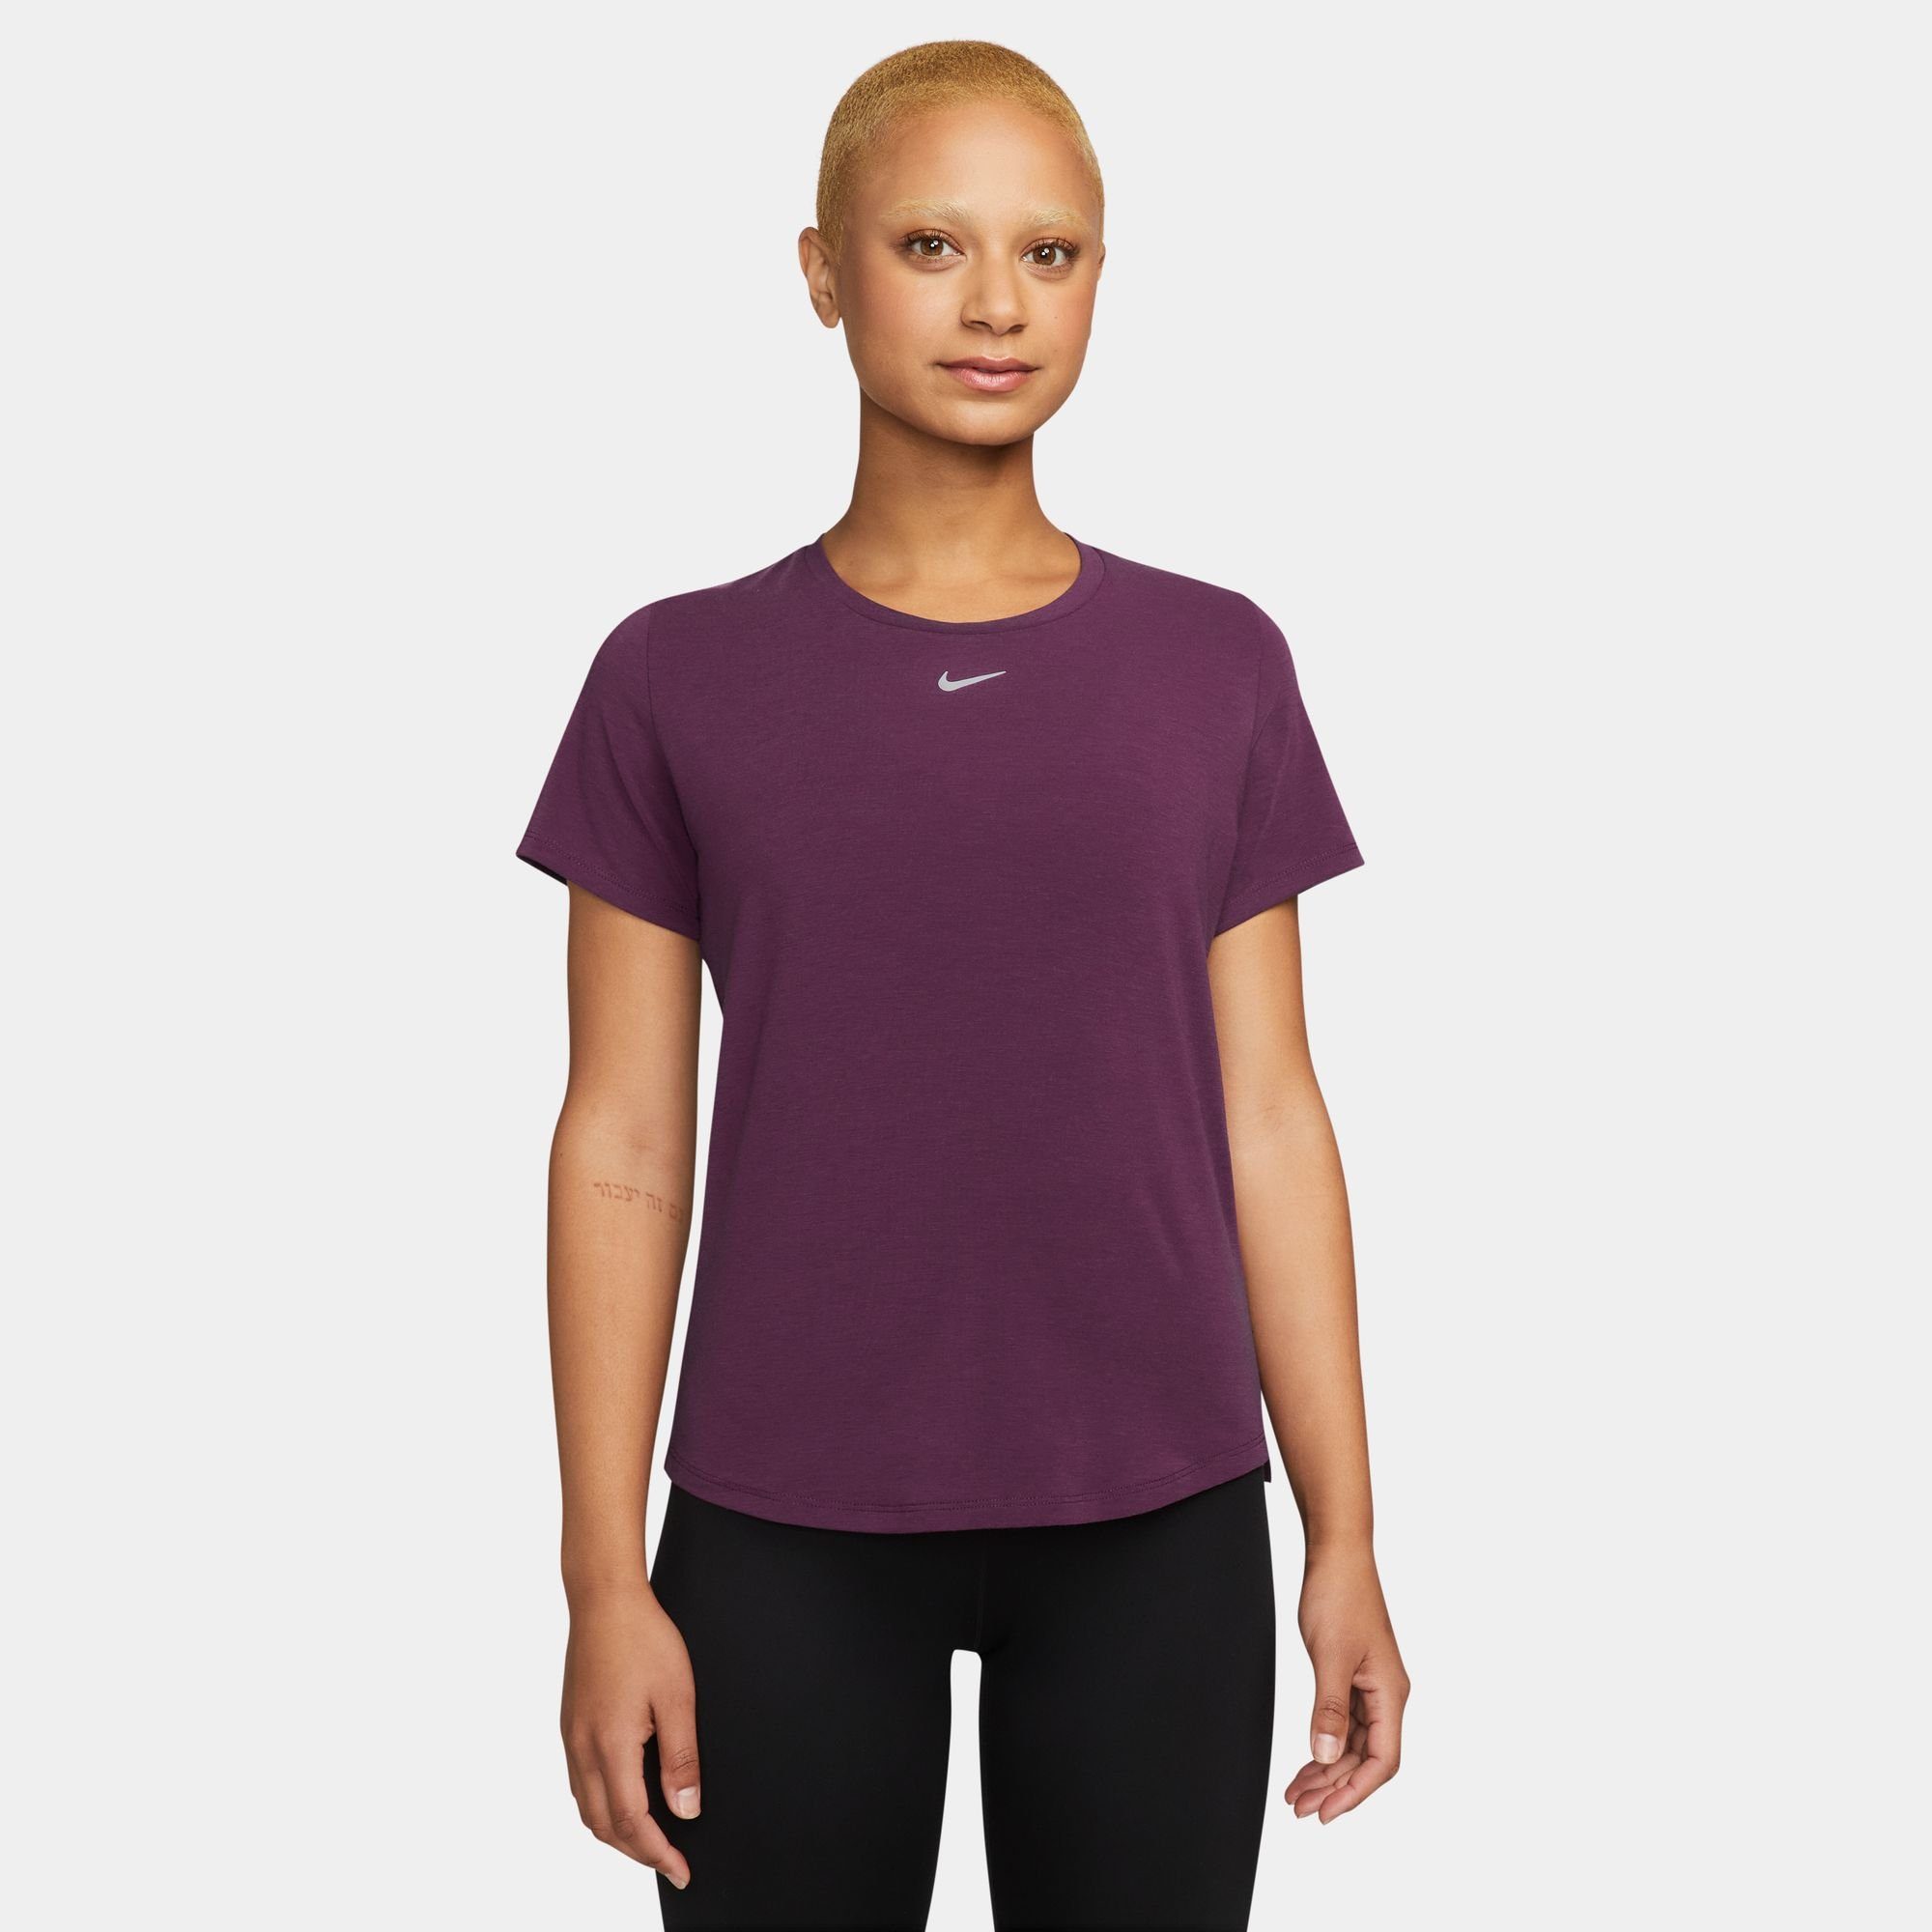 Nike Trainingsshirt DRI-FIT UV ONE LUXE WOMEN'S STANDARD FIT SHORT-SLEEVE TOP BORDEAUX/REFLECTIVE SILV | Funktionsshirts